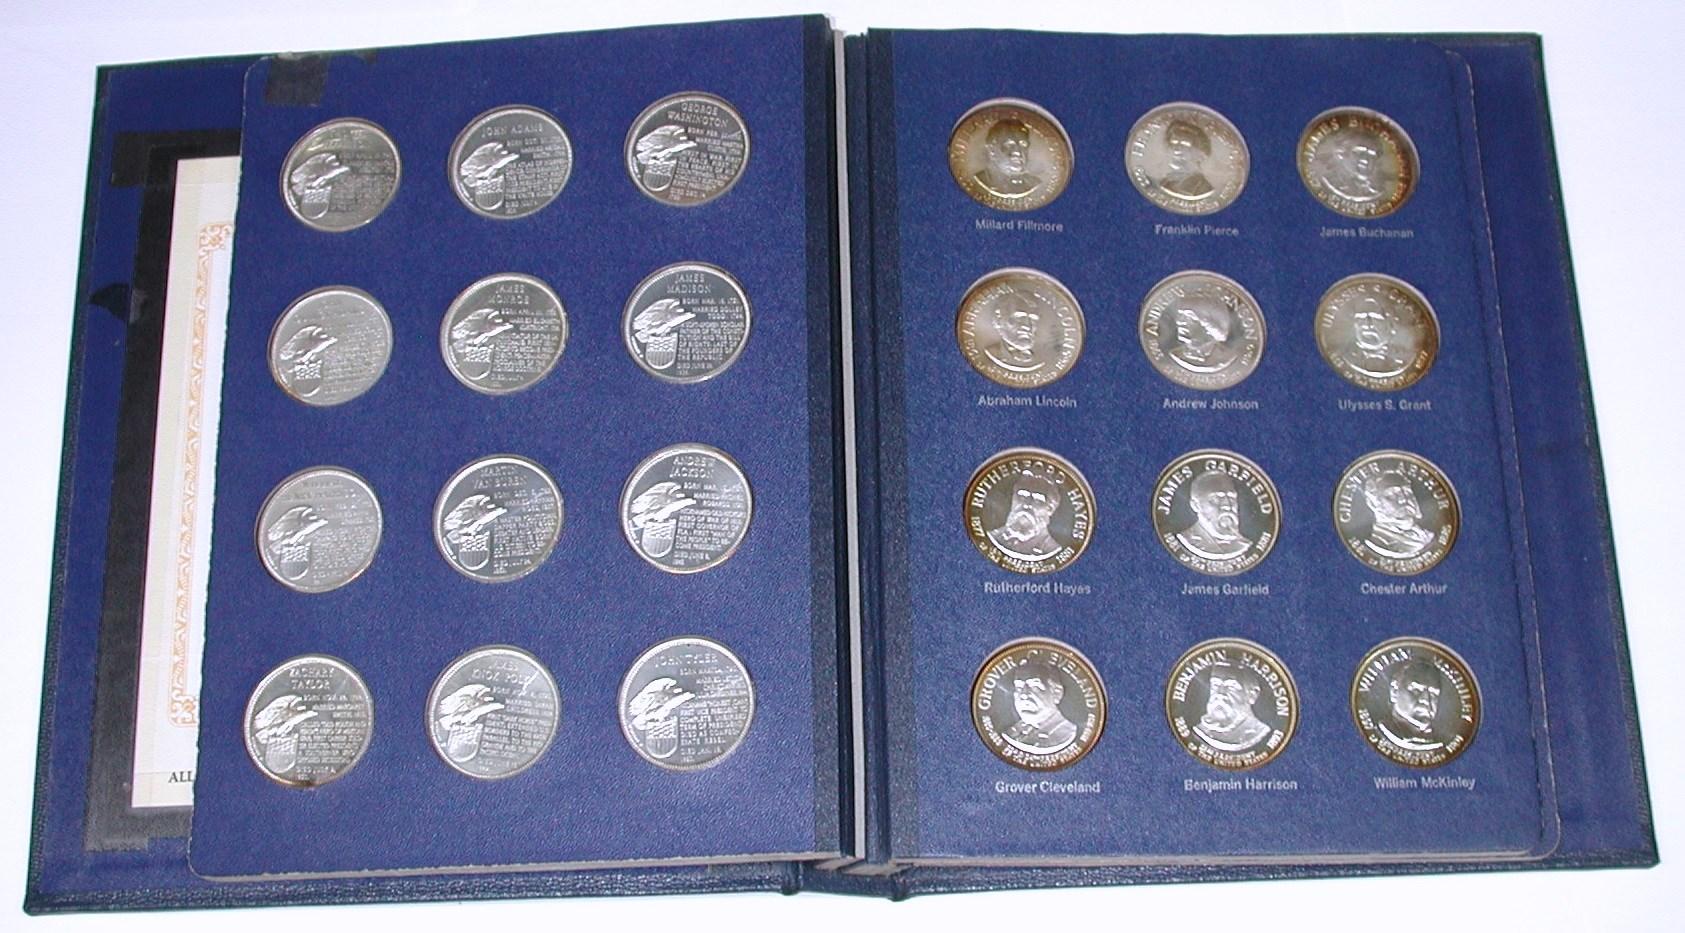 1970 AMERICAN EXPRESS FRANKLIN MINT TREASURY of PRESIDENTIAL COMMEMORATIVE MEDALS - STERLING SILVER